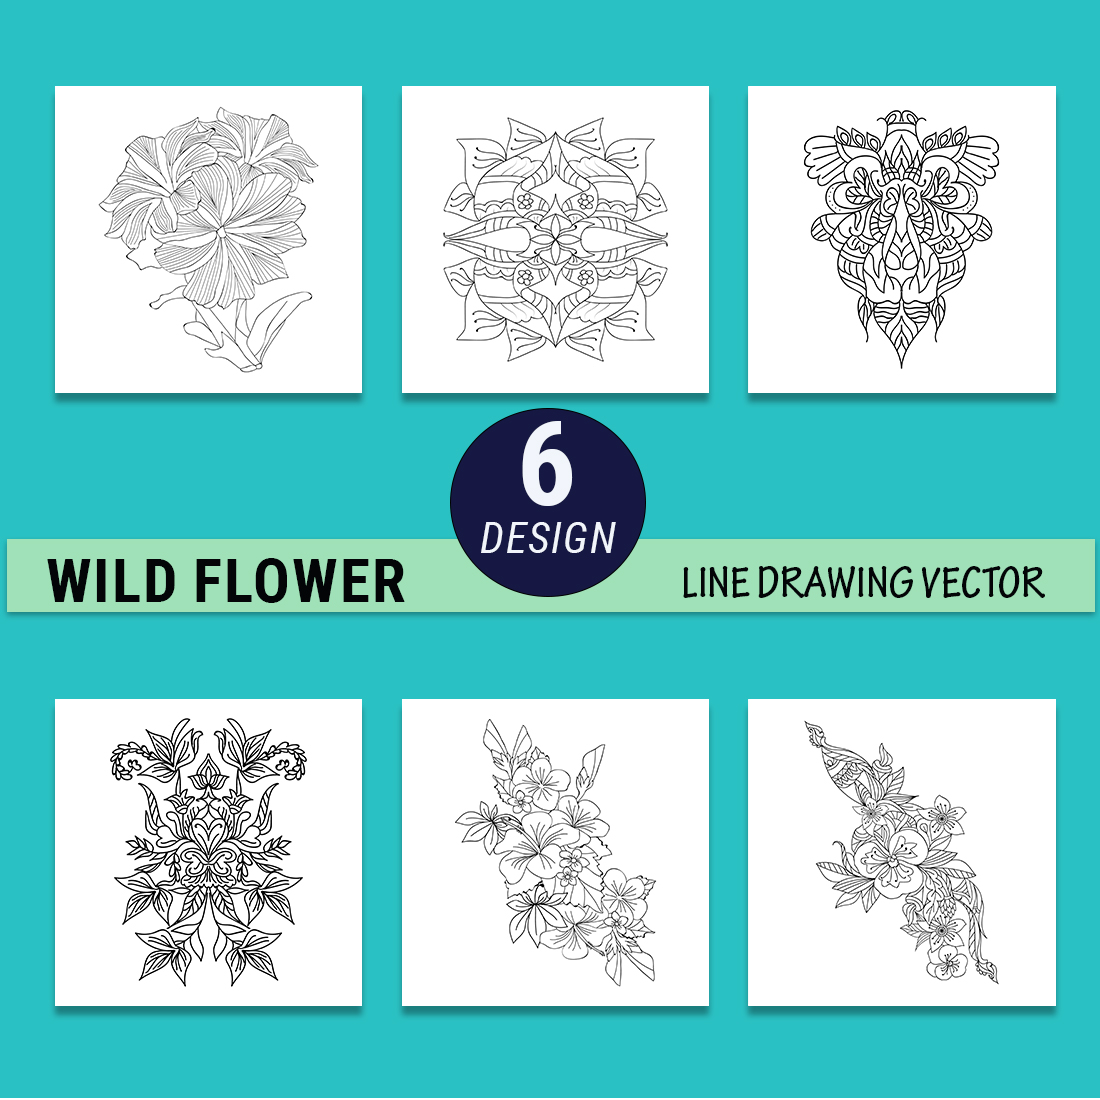 How to draw flower designs || simple flower designs | pencil drawing art by  tanjina drawing - YouTube